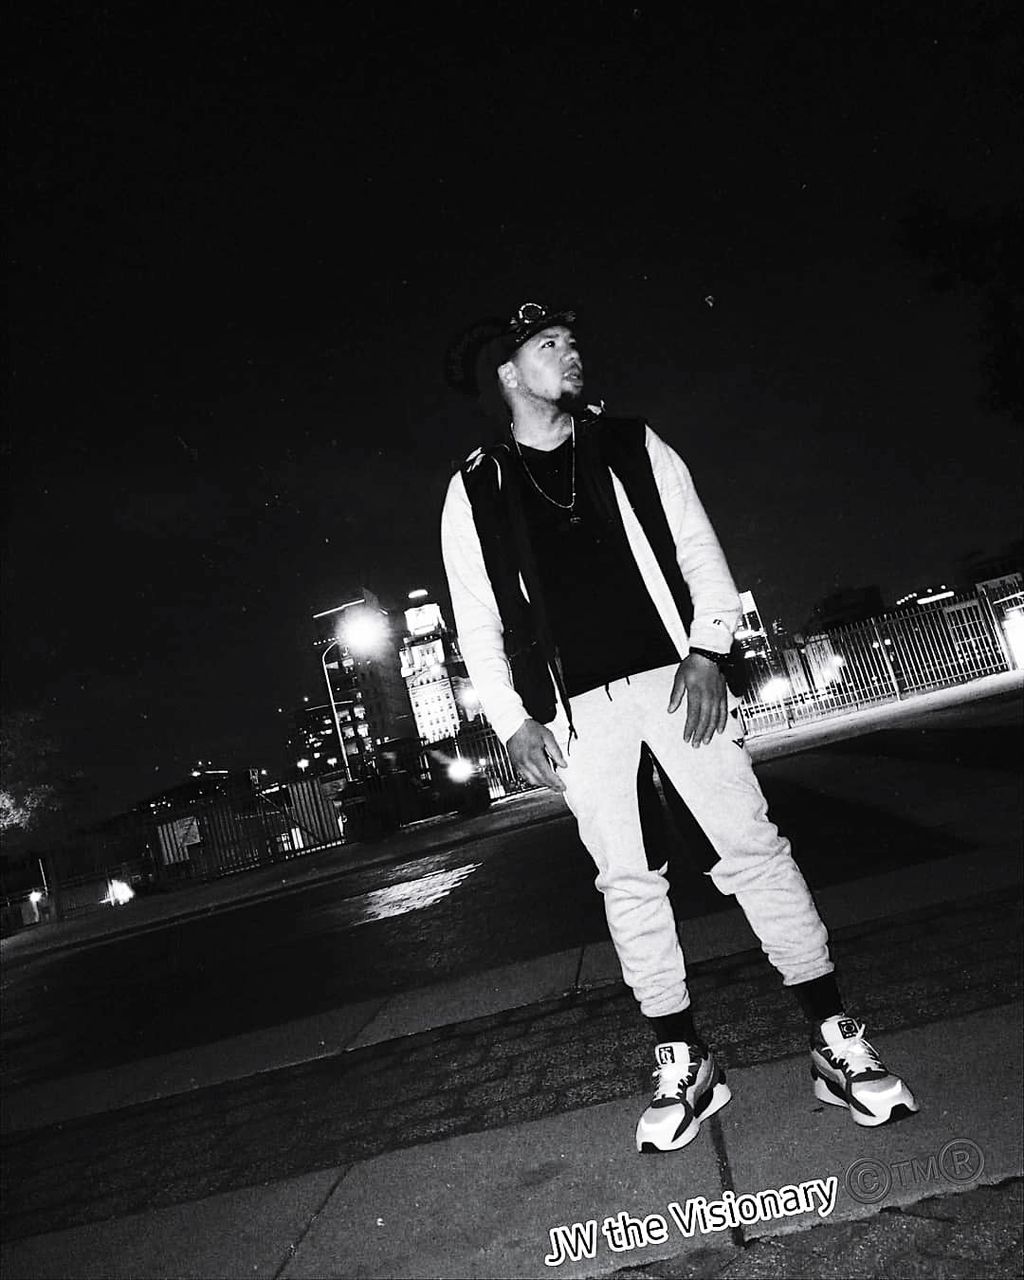 black, white, night, black and white, full length, one person, monochrome, darkness, monochrome photography, skateboard, city, footwear, adult, skateboarding equipment, sports, men, clothing, architecture, young adult, lifestyles, person, arts culture and entertainment, leisure activity, standing, motion, sports equipment, street